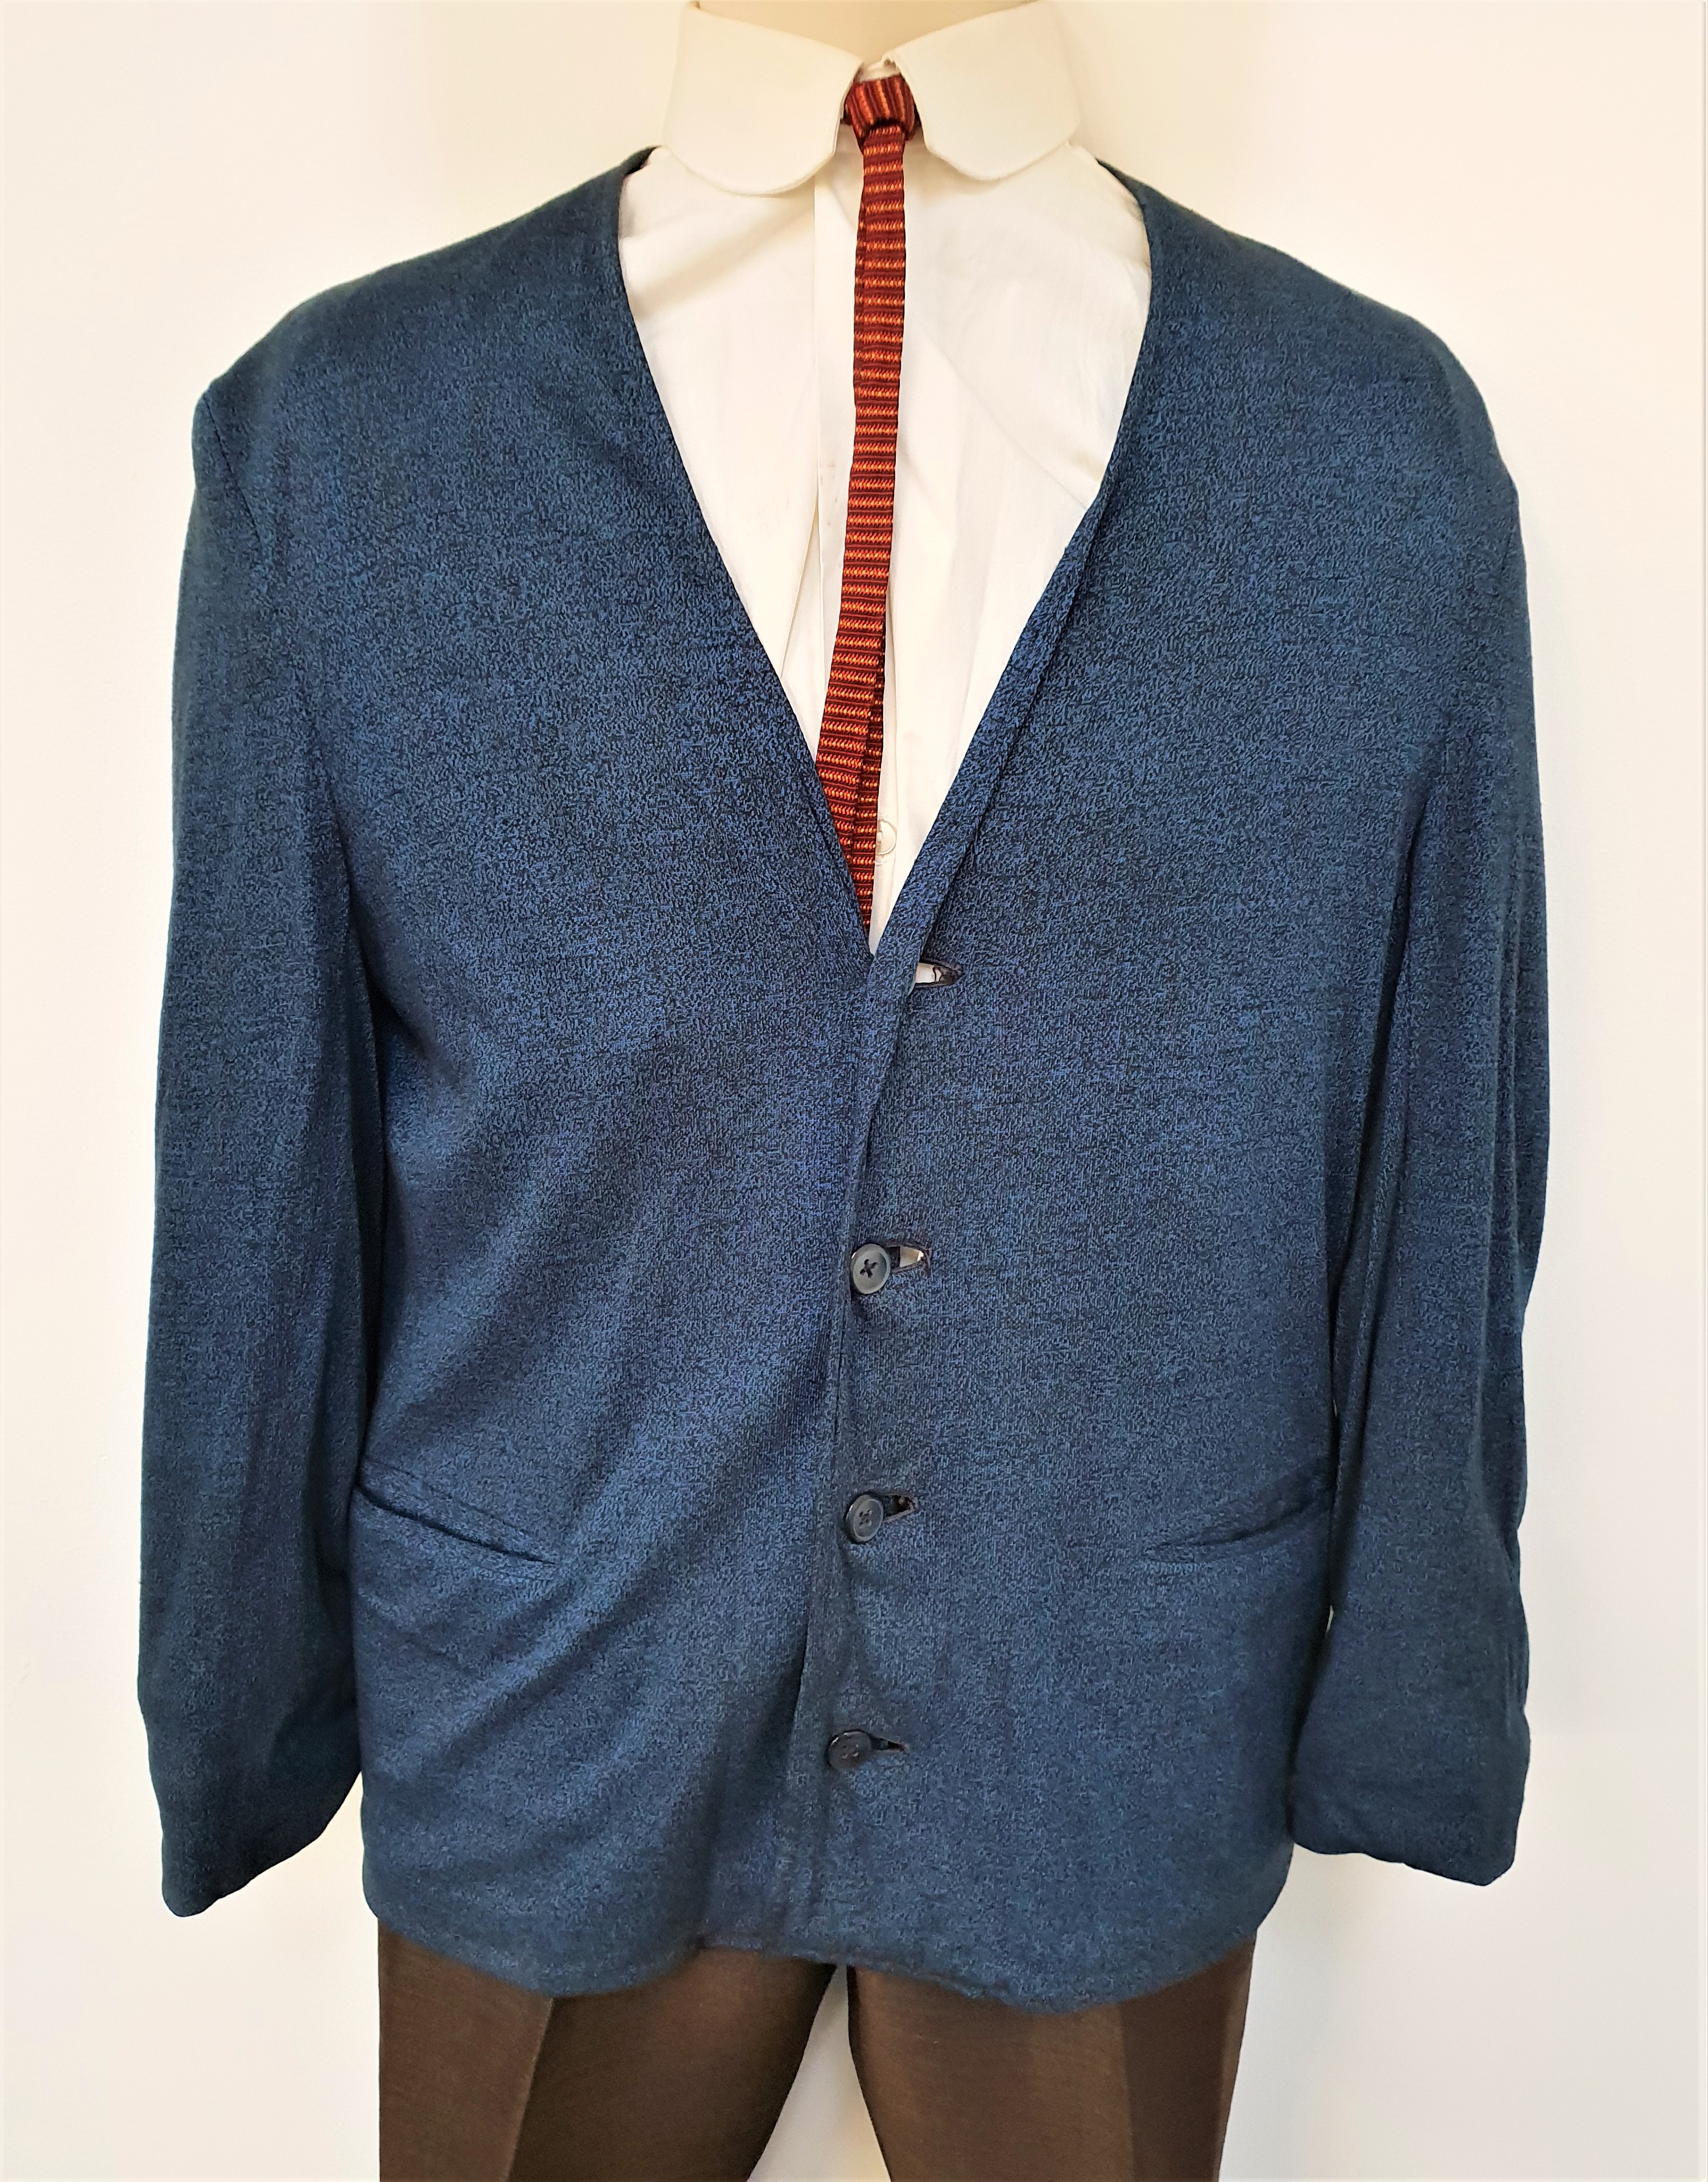 THE BEATLES - RINGO STARR'S SUIT, SHIRT AND TIE the collarless four button jacket in blue jersey - Image 2 of 8